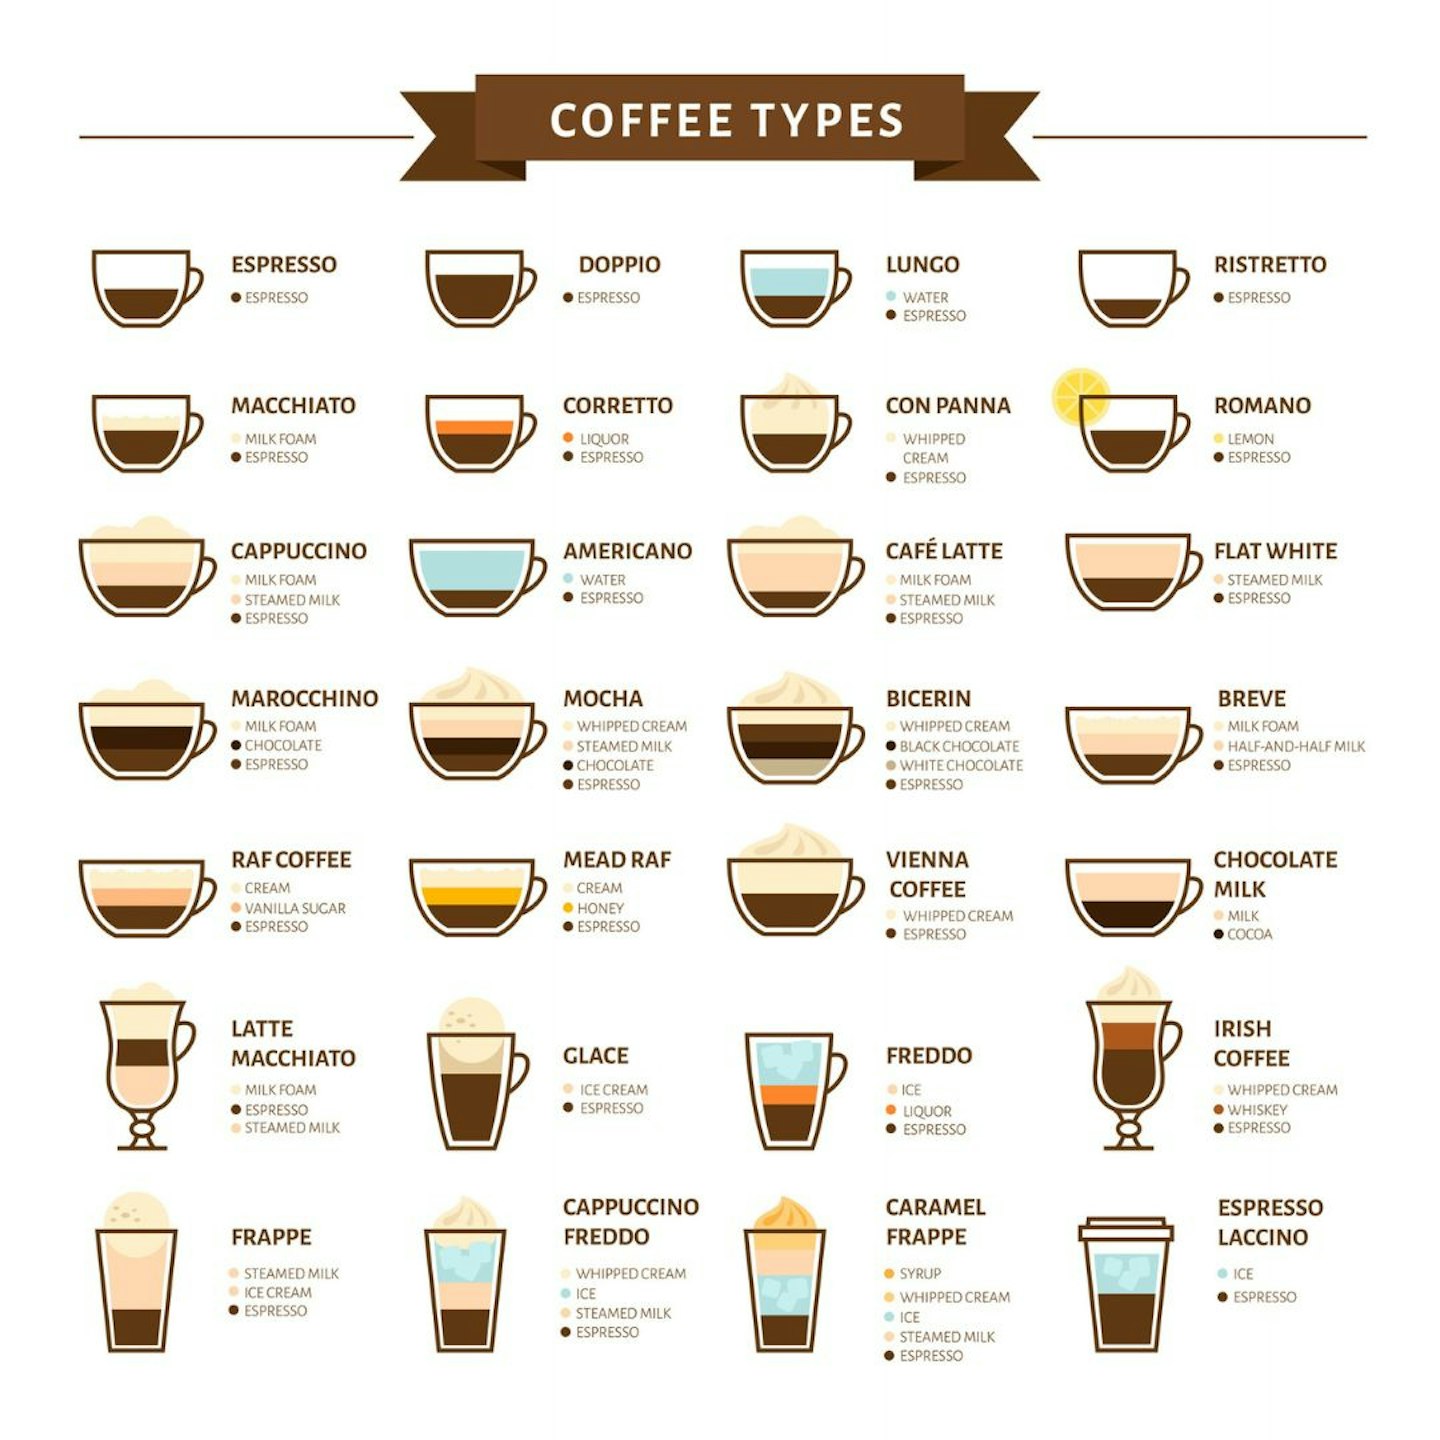 https://images.bauerhosting.com/affiliates/sites/10/2023/04/Guide-to-types-of-coffee.jpg?auto=format&w=1440&q=80